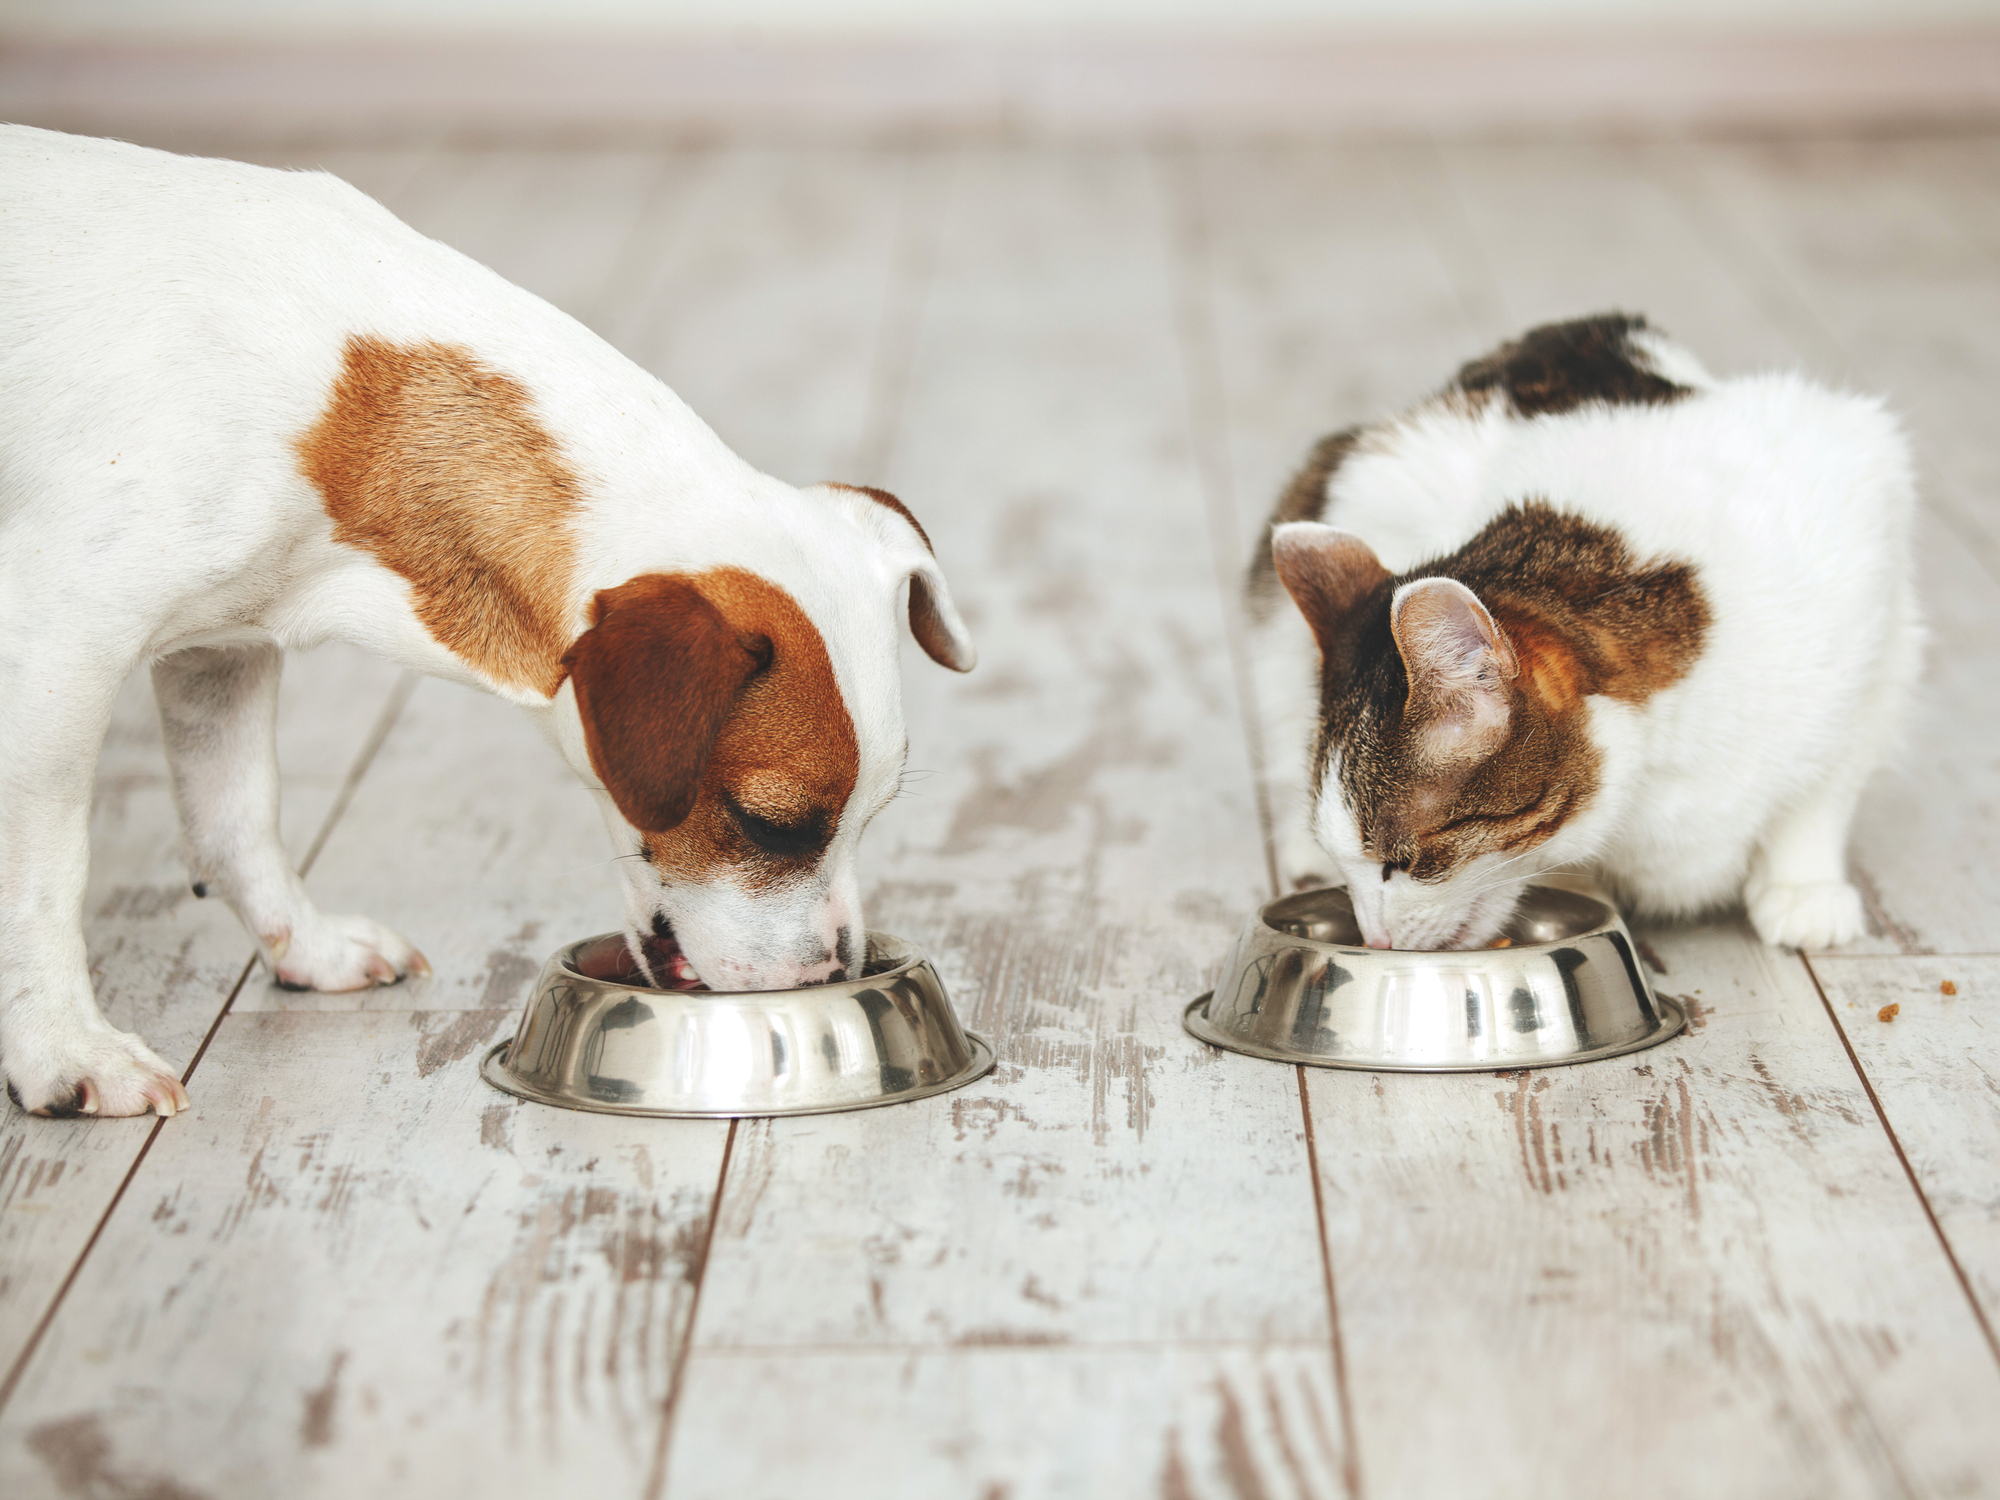 Terrier mix dog and calico tabby cat eating vegan pet food from stainless steel bowls.